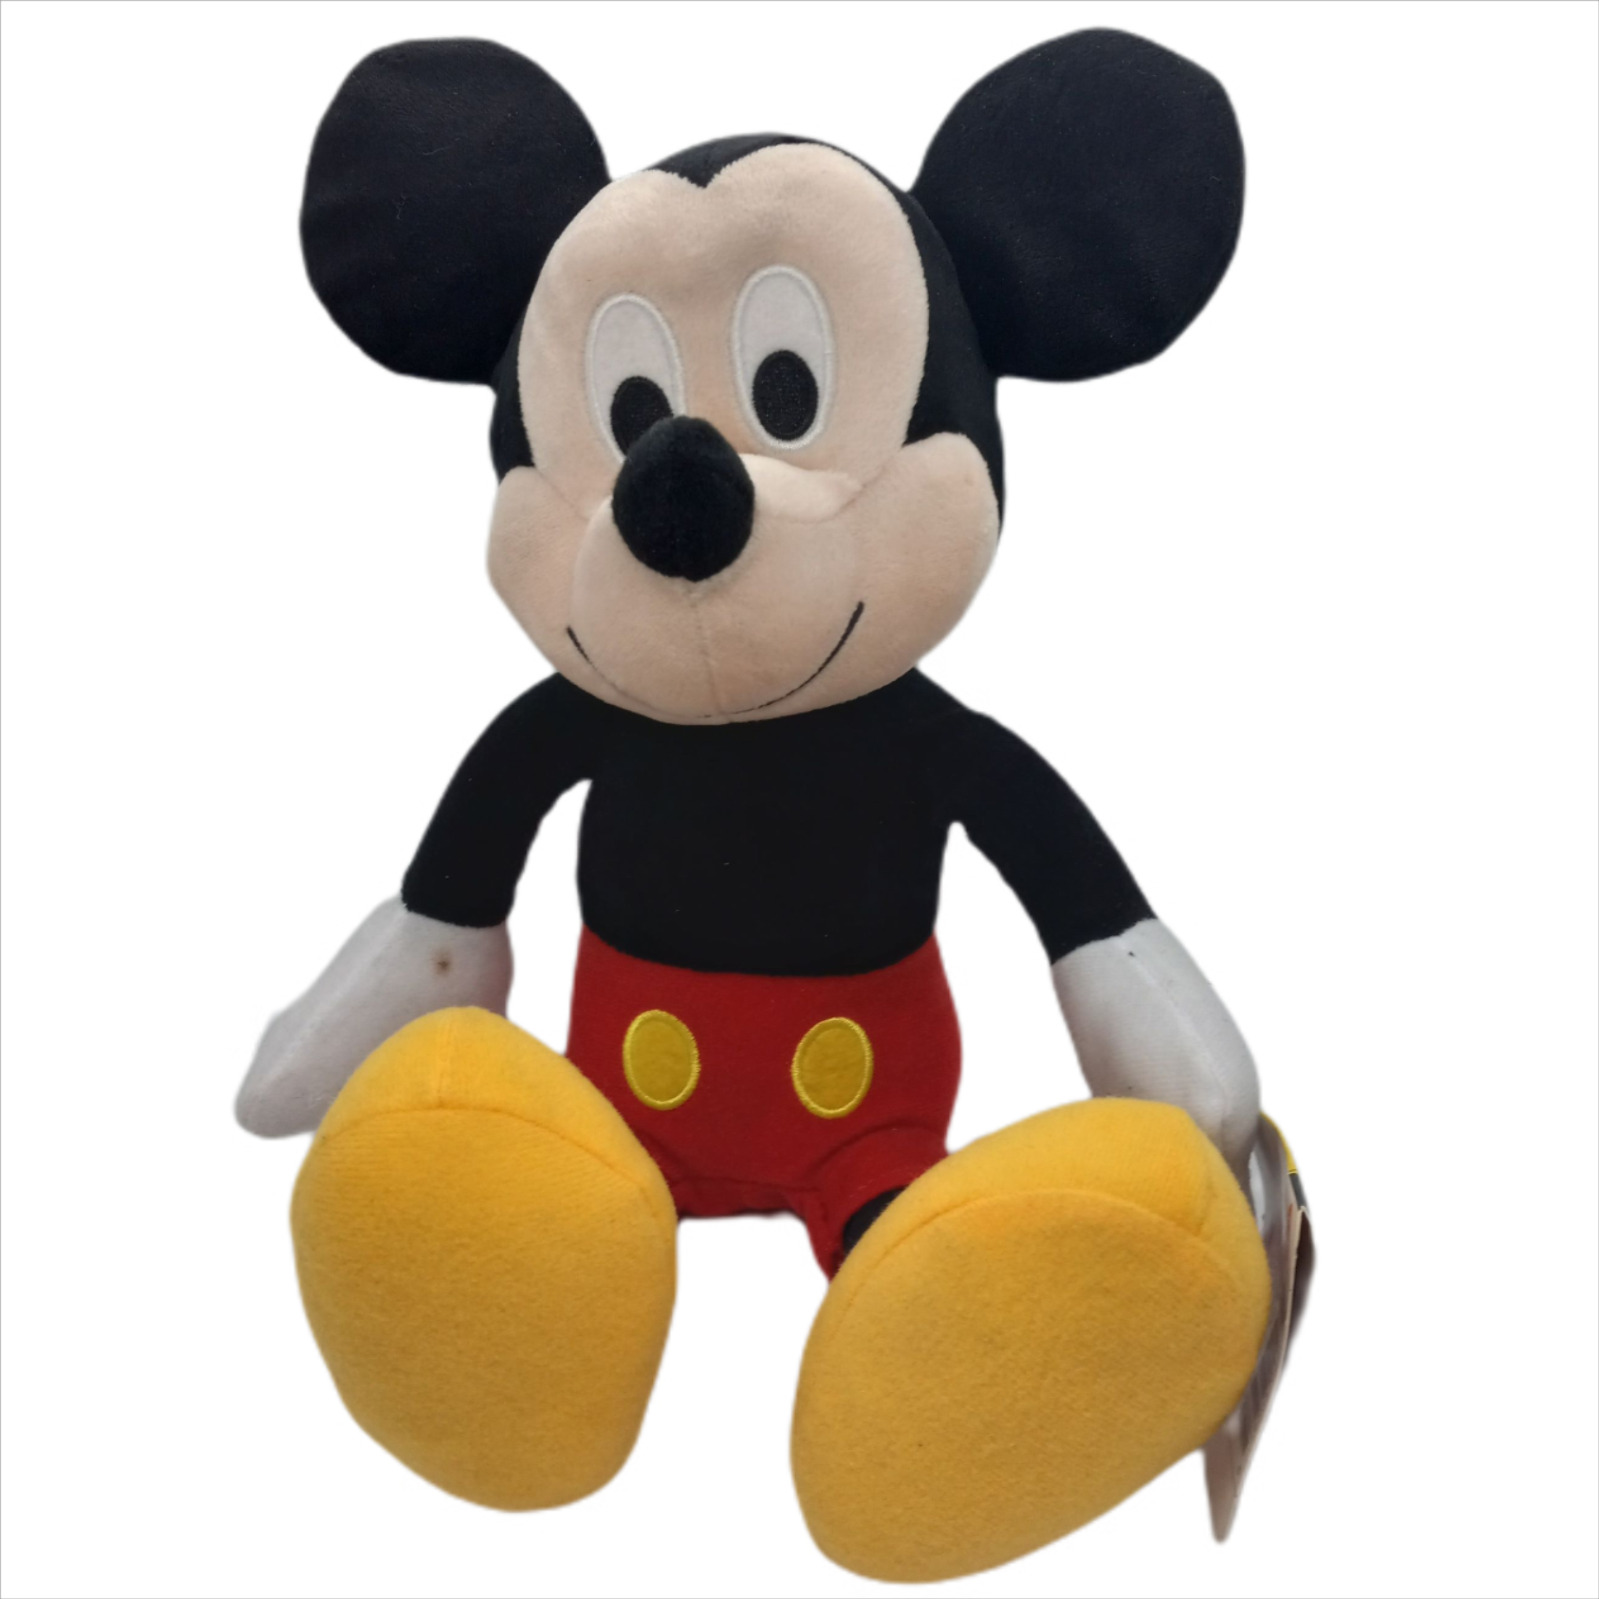 Mickey Mouse Plush Doll. Disney 90 Years Anniversary (Used)